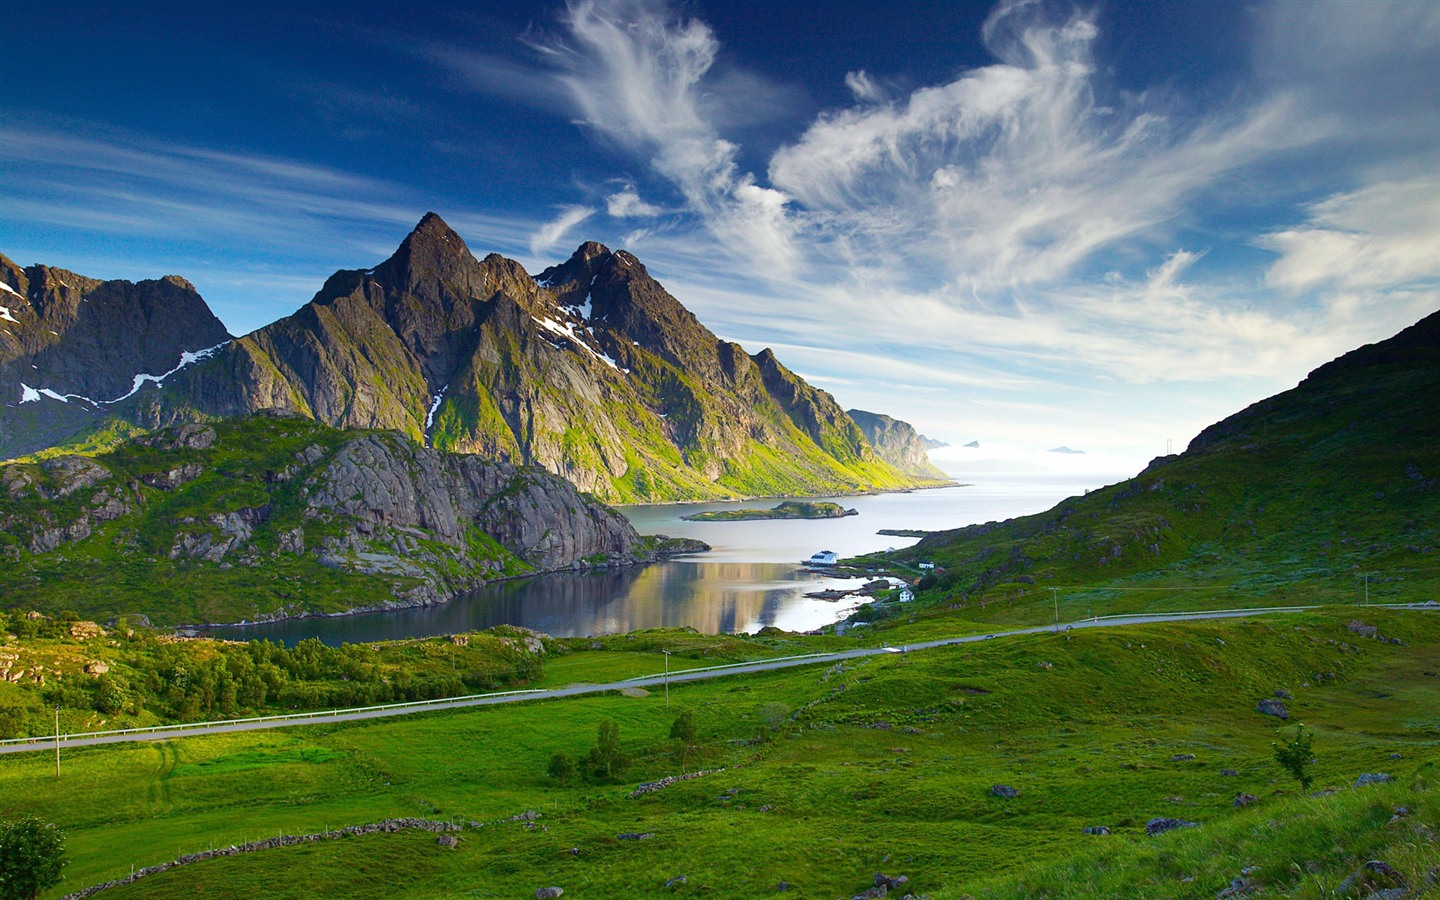 Windows 7 Wallpapers: Nordic Landscapes #1 - 1440x900